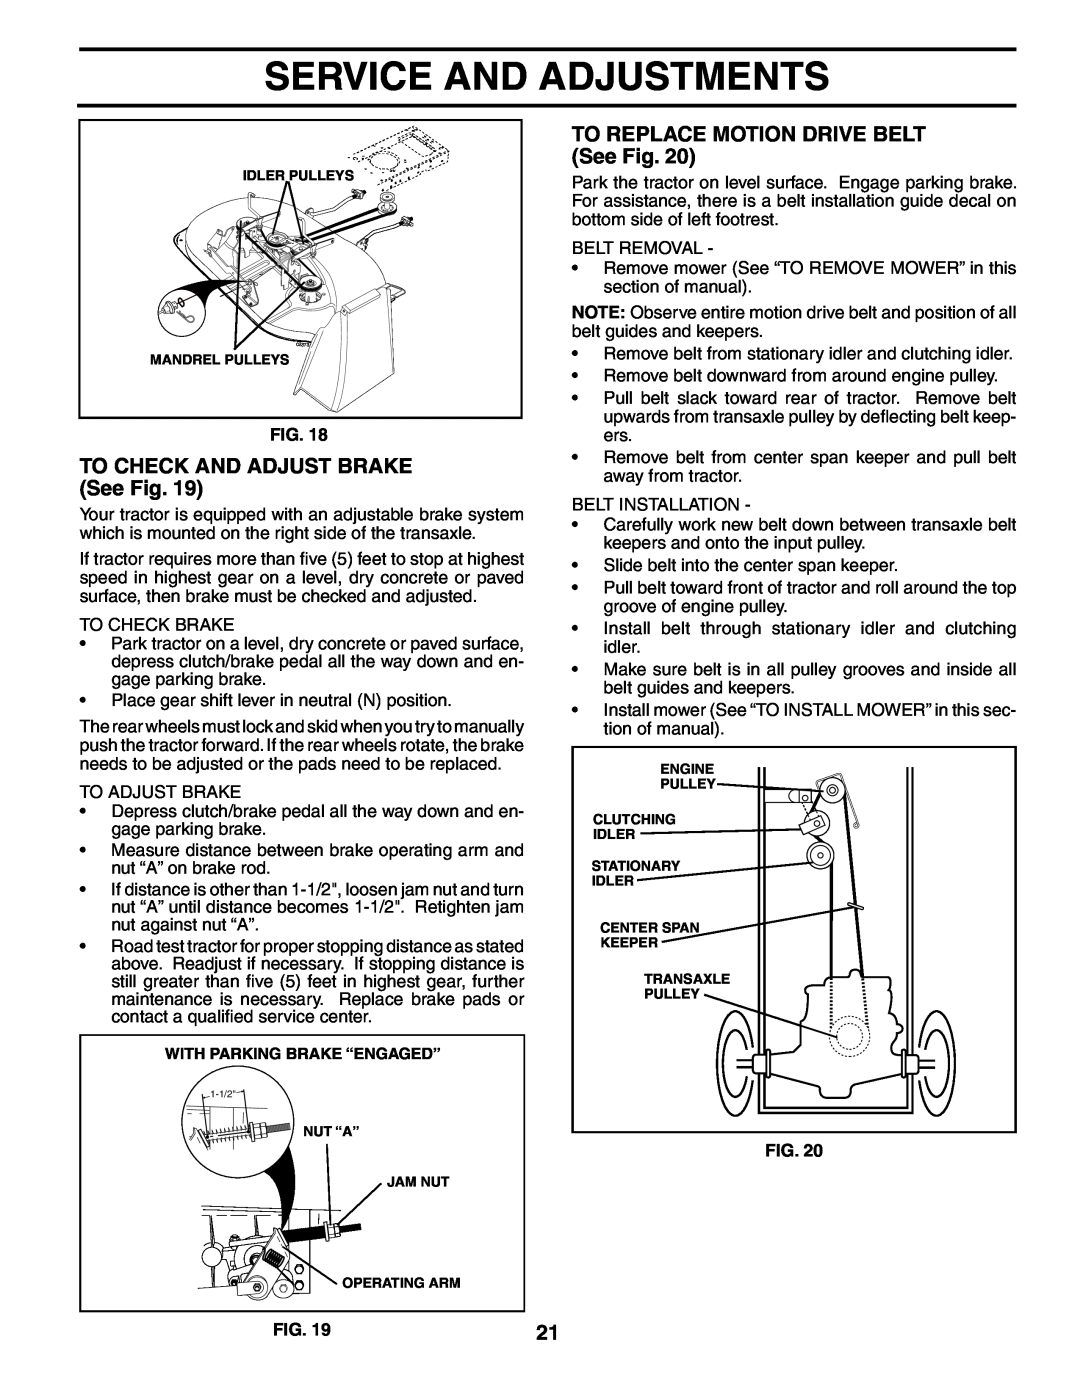 Poulan HD13538 manual TO CHECK AND ADJUST BRAKE See Fig, TO REPLACE MOTION DRIVE BELT See Fig, Service And Adjustments 